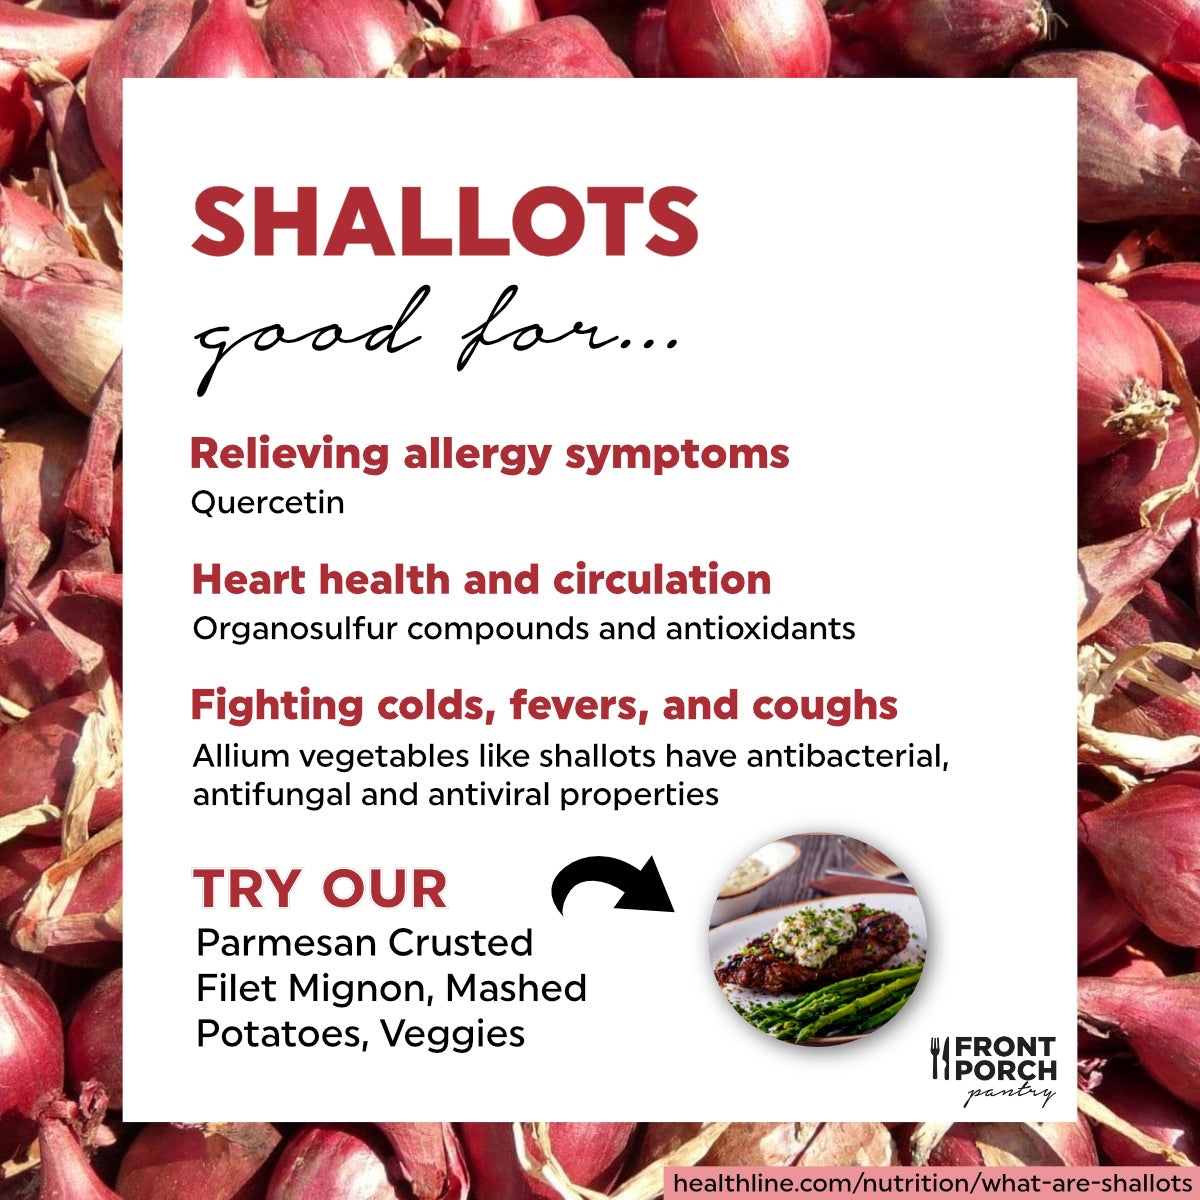 Shallots - Health Benefits, Uses and Important Facts - PotsandPans